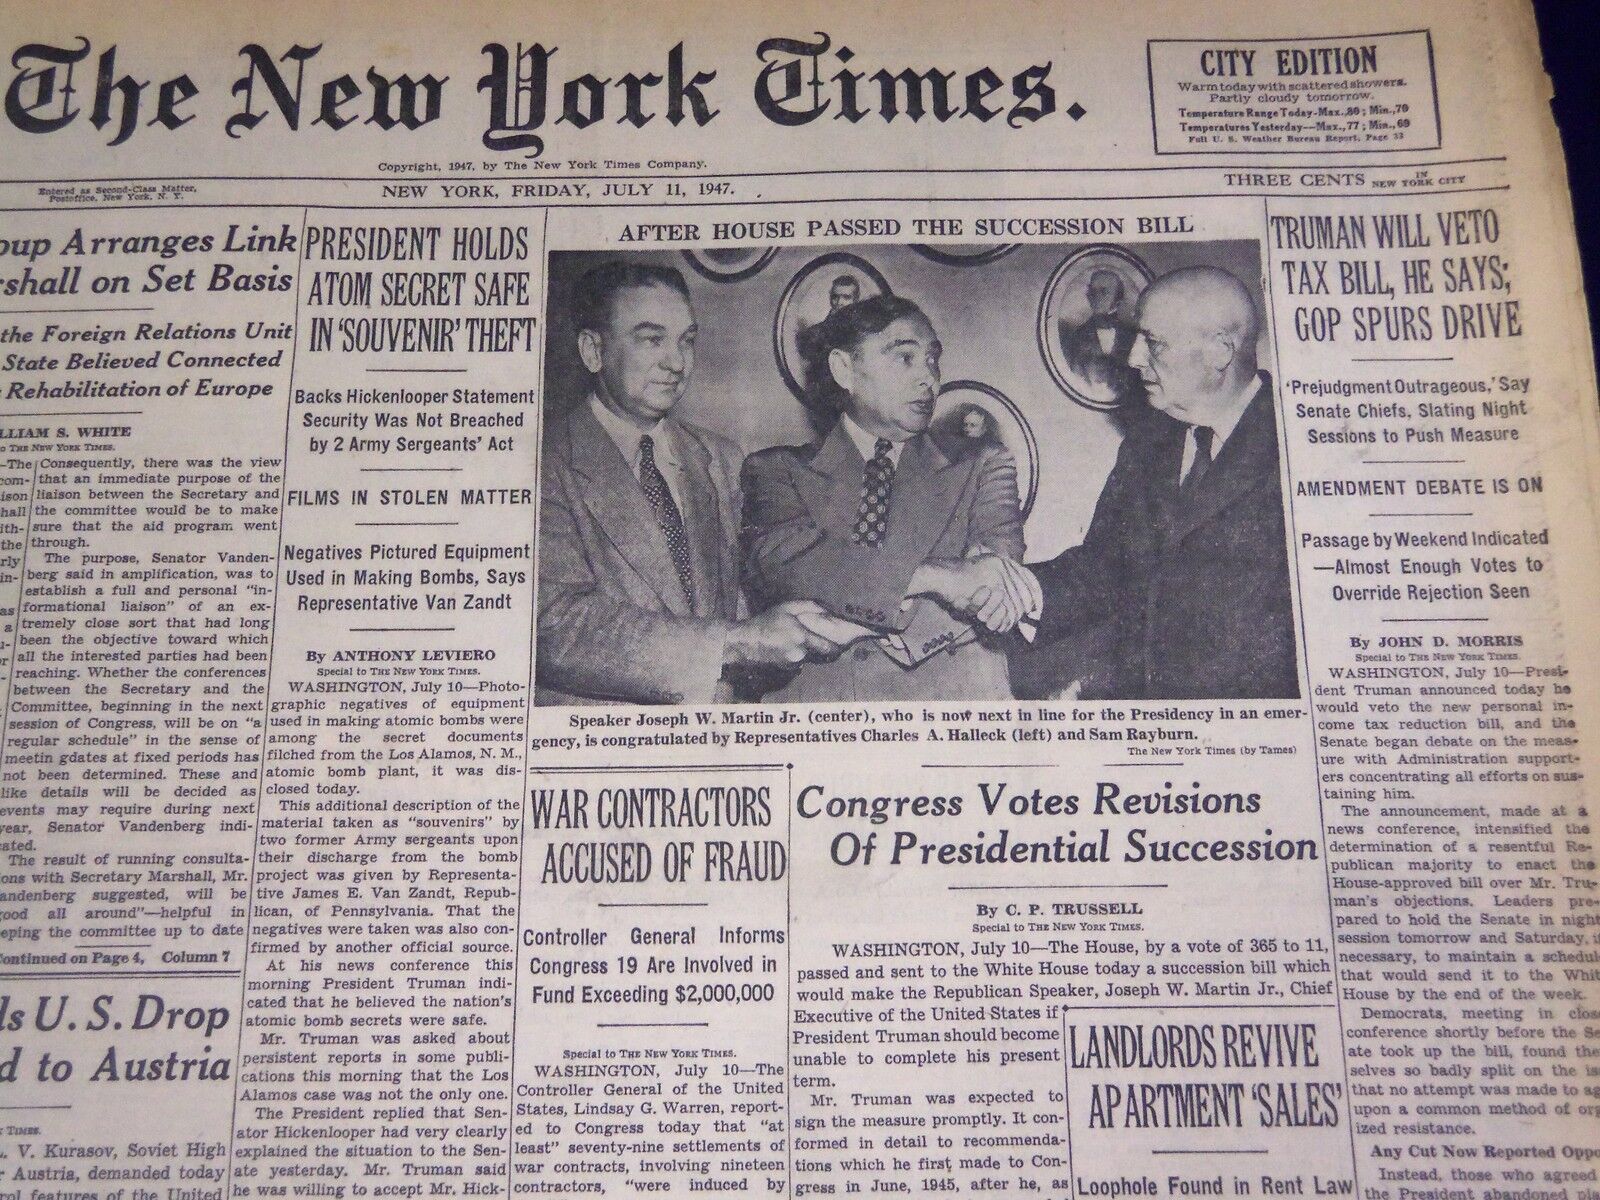 1947 JULY 11 NEW YORK TIMES - HOUSE PASSES SUCCESSION BILL - NT 1409